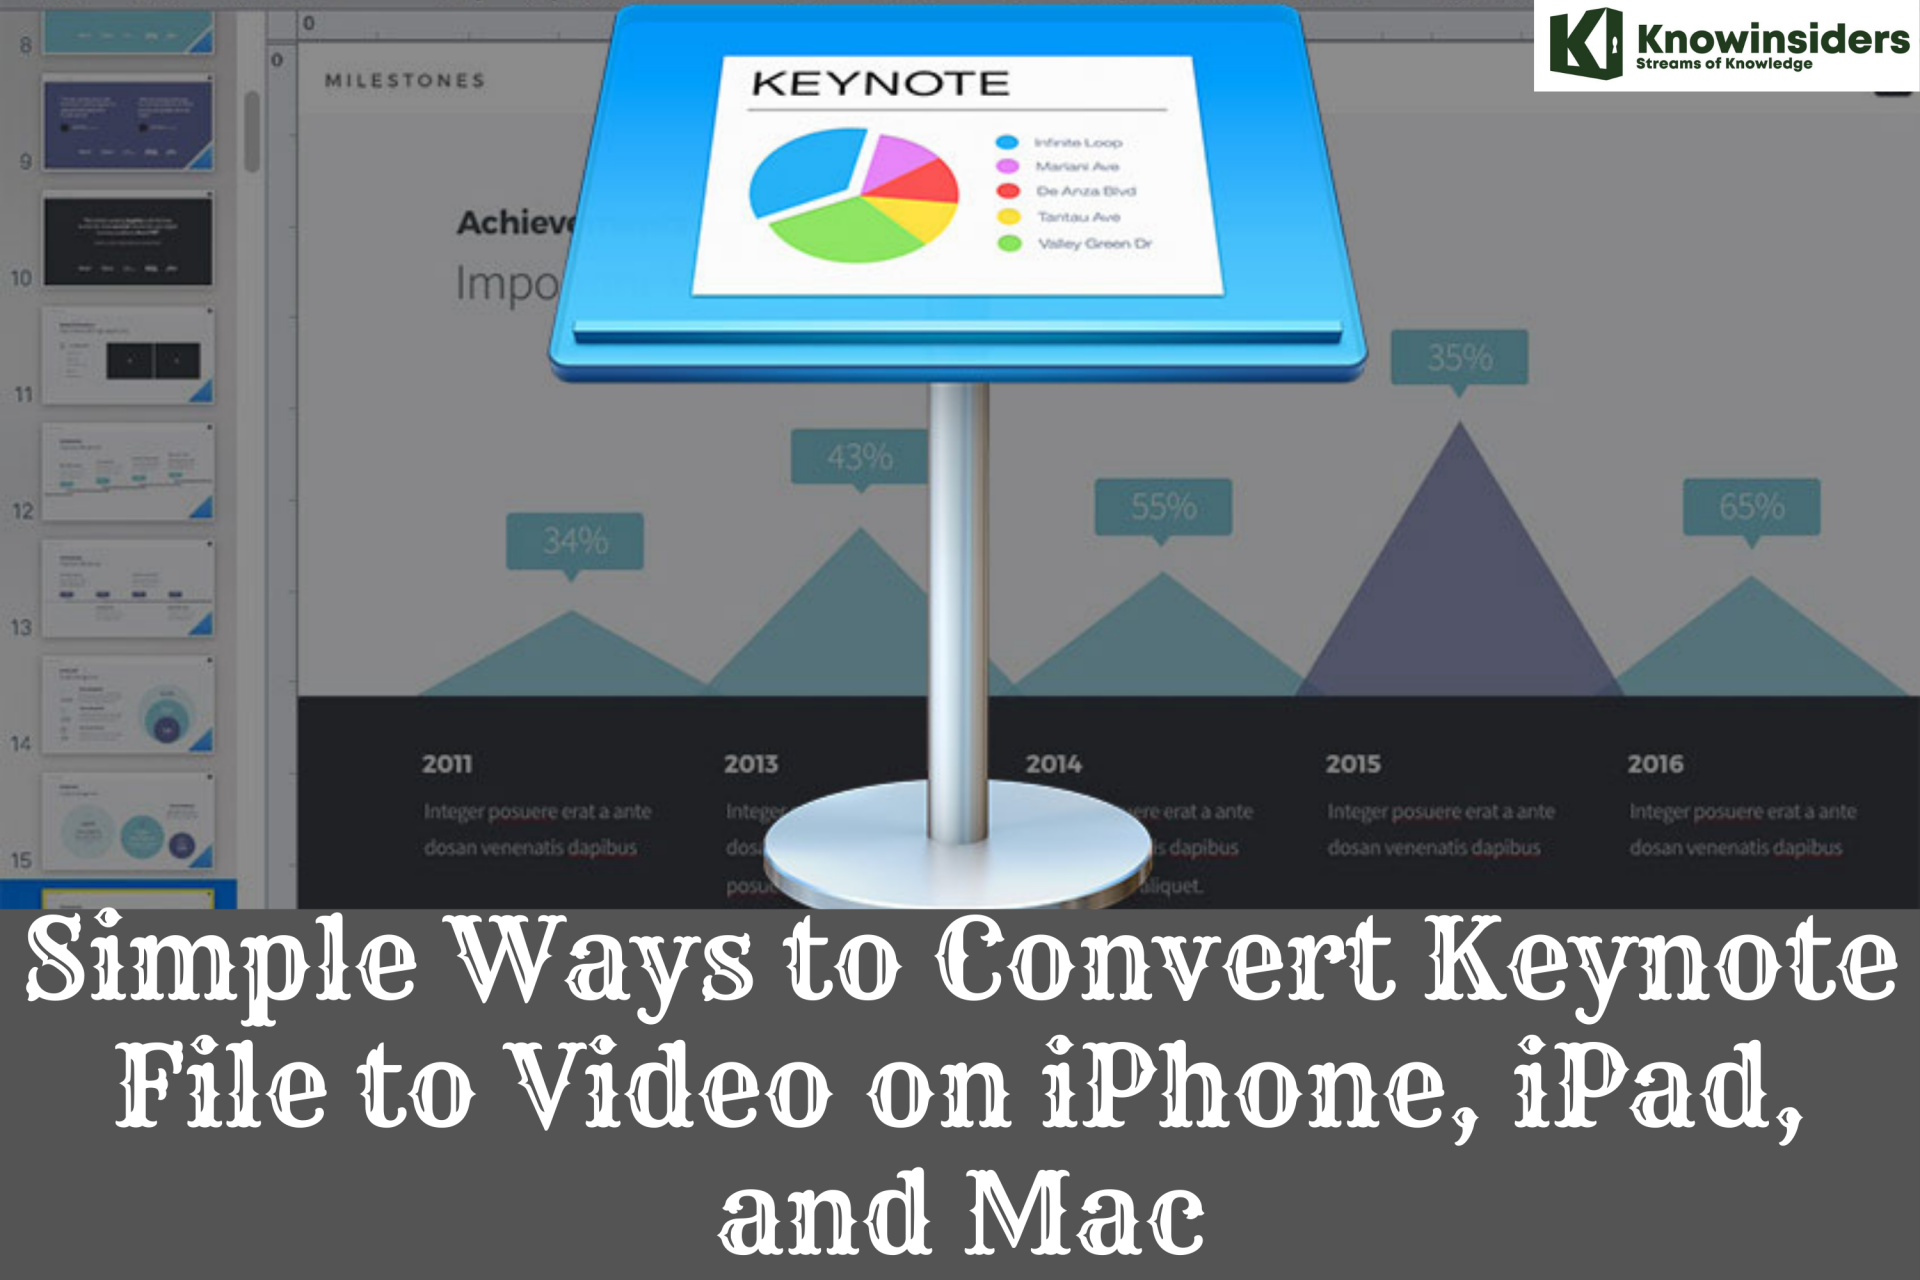 Simple Ways to Convert Keynote File to Video on iPhone, iPad, and Mac - A Complete Guide